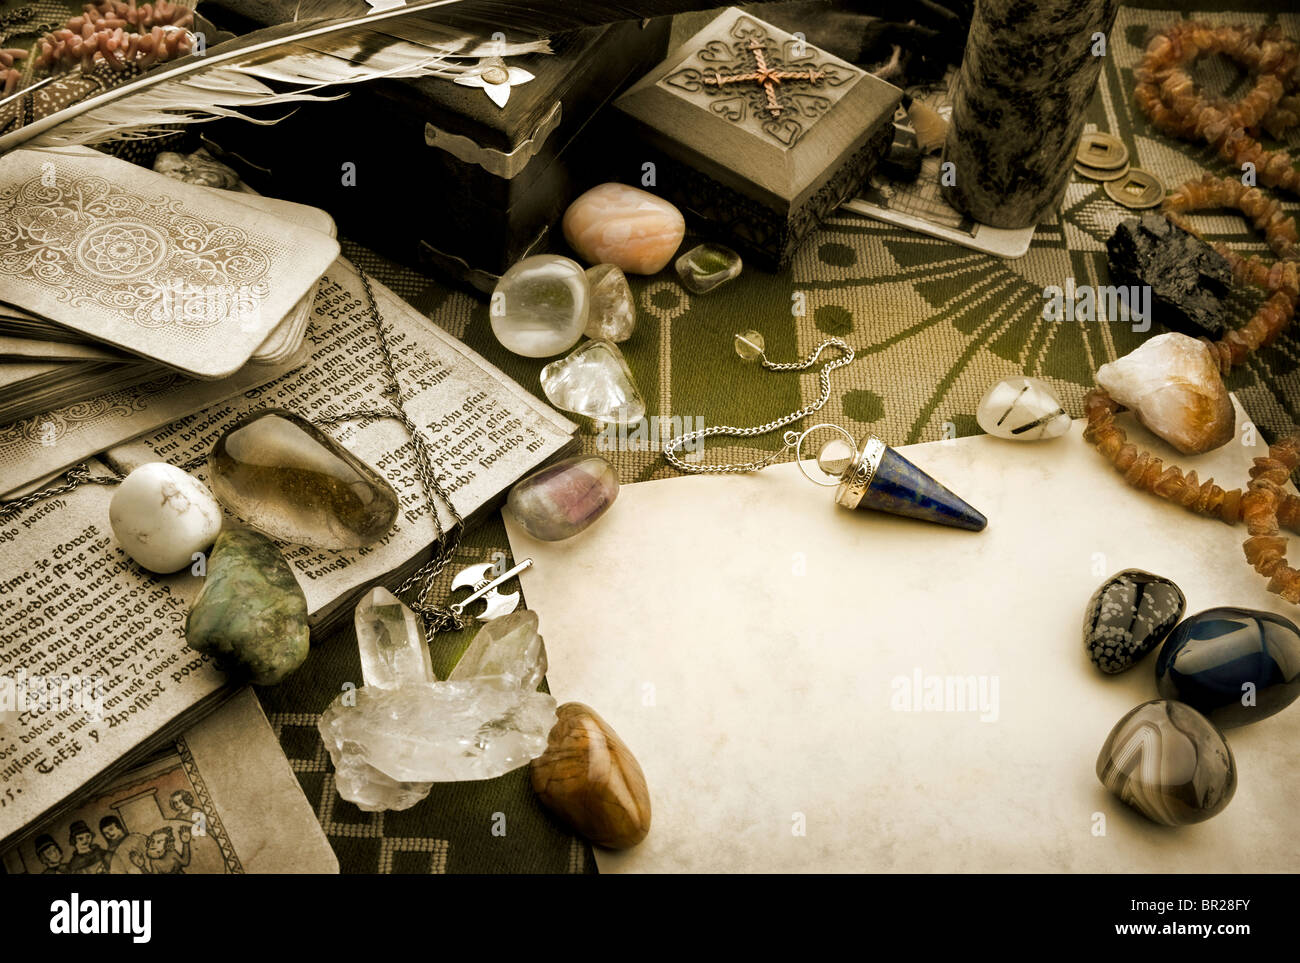 Still life with esoteric objects Stock Photo